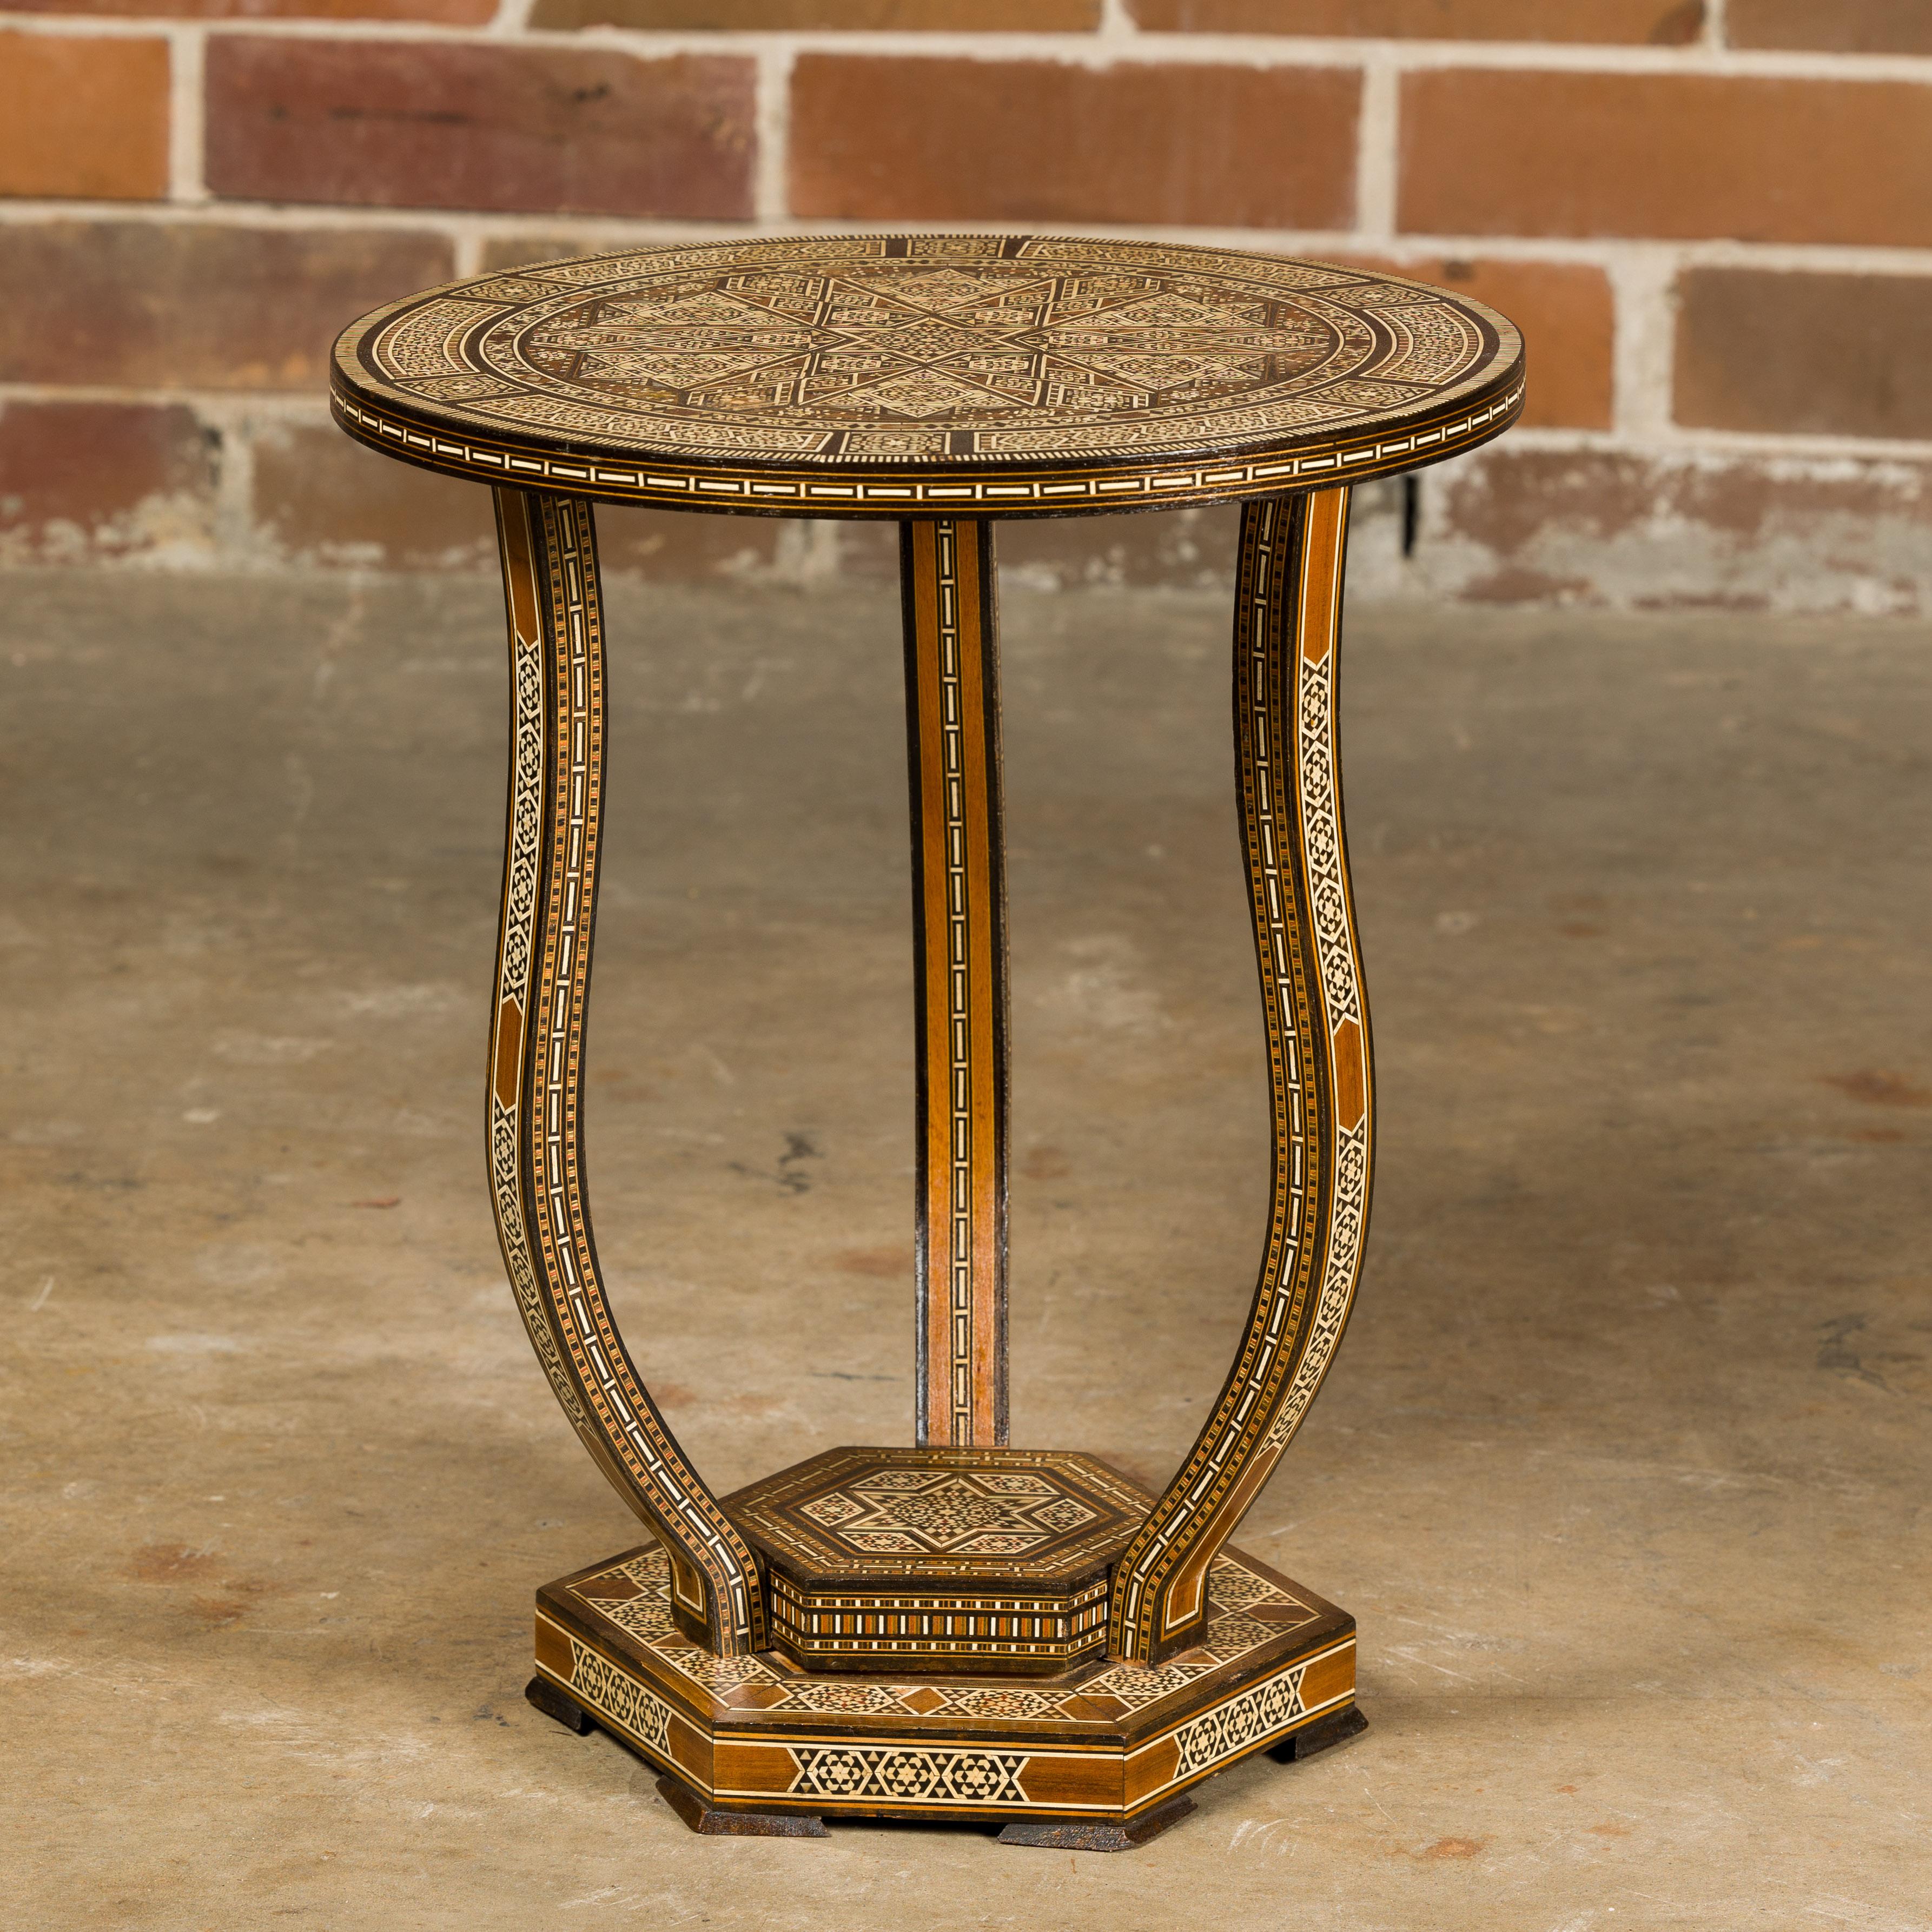 20th Century Moorish Style 1900s Moroccan Low Table with Round Top and Geometric Bone Inlay For Sale